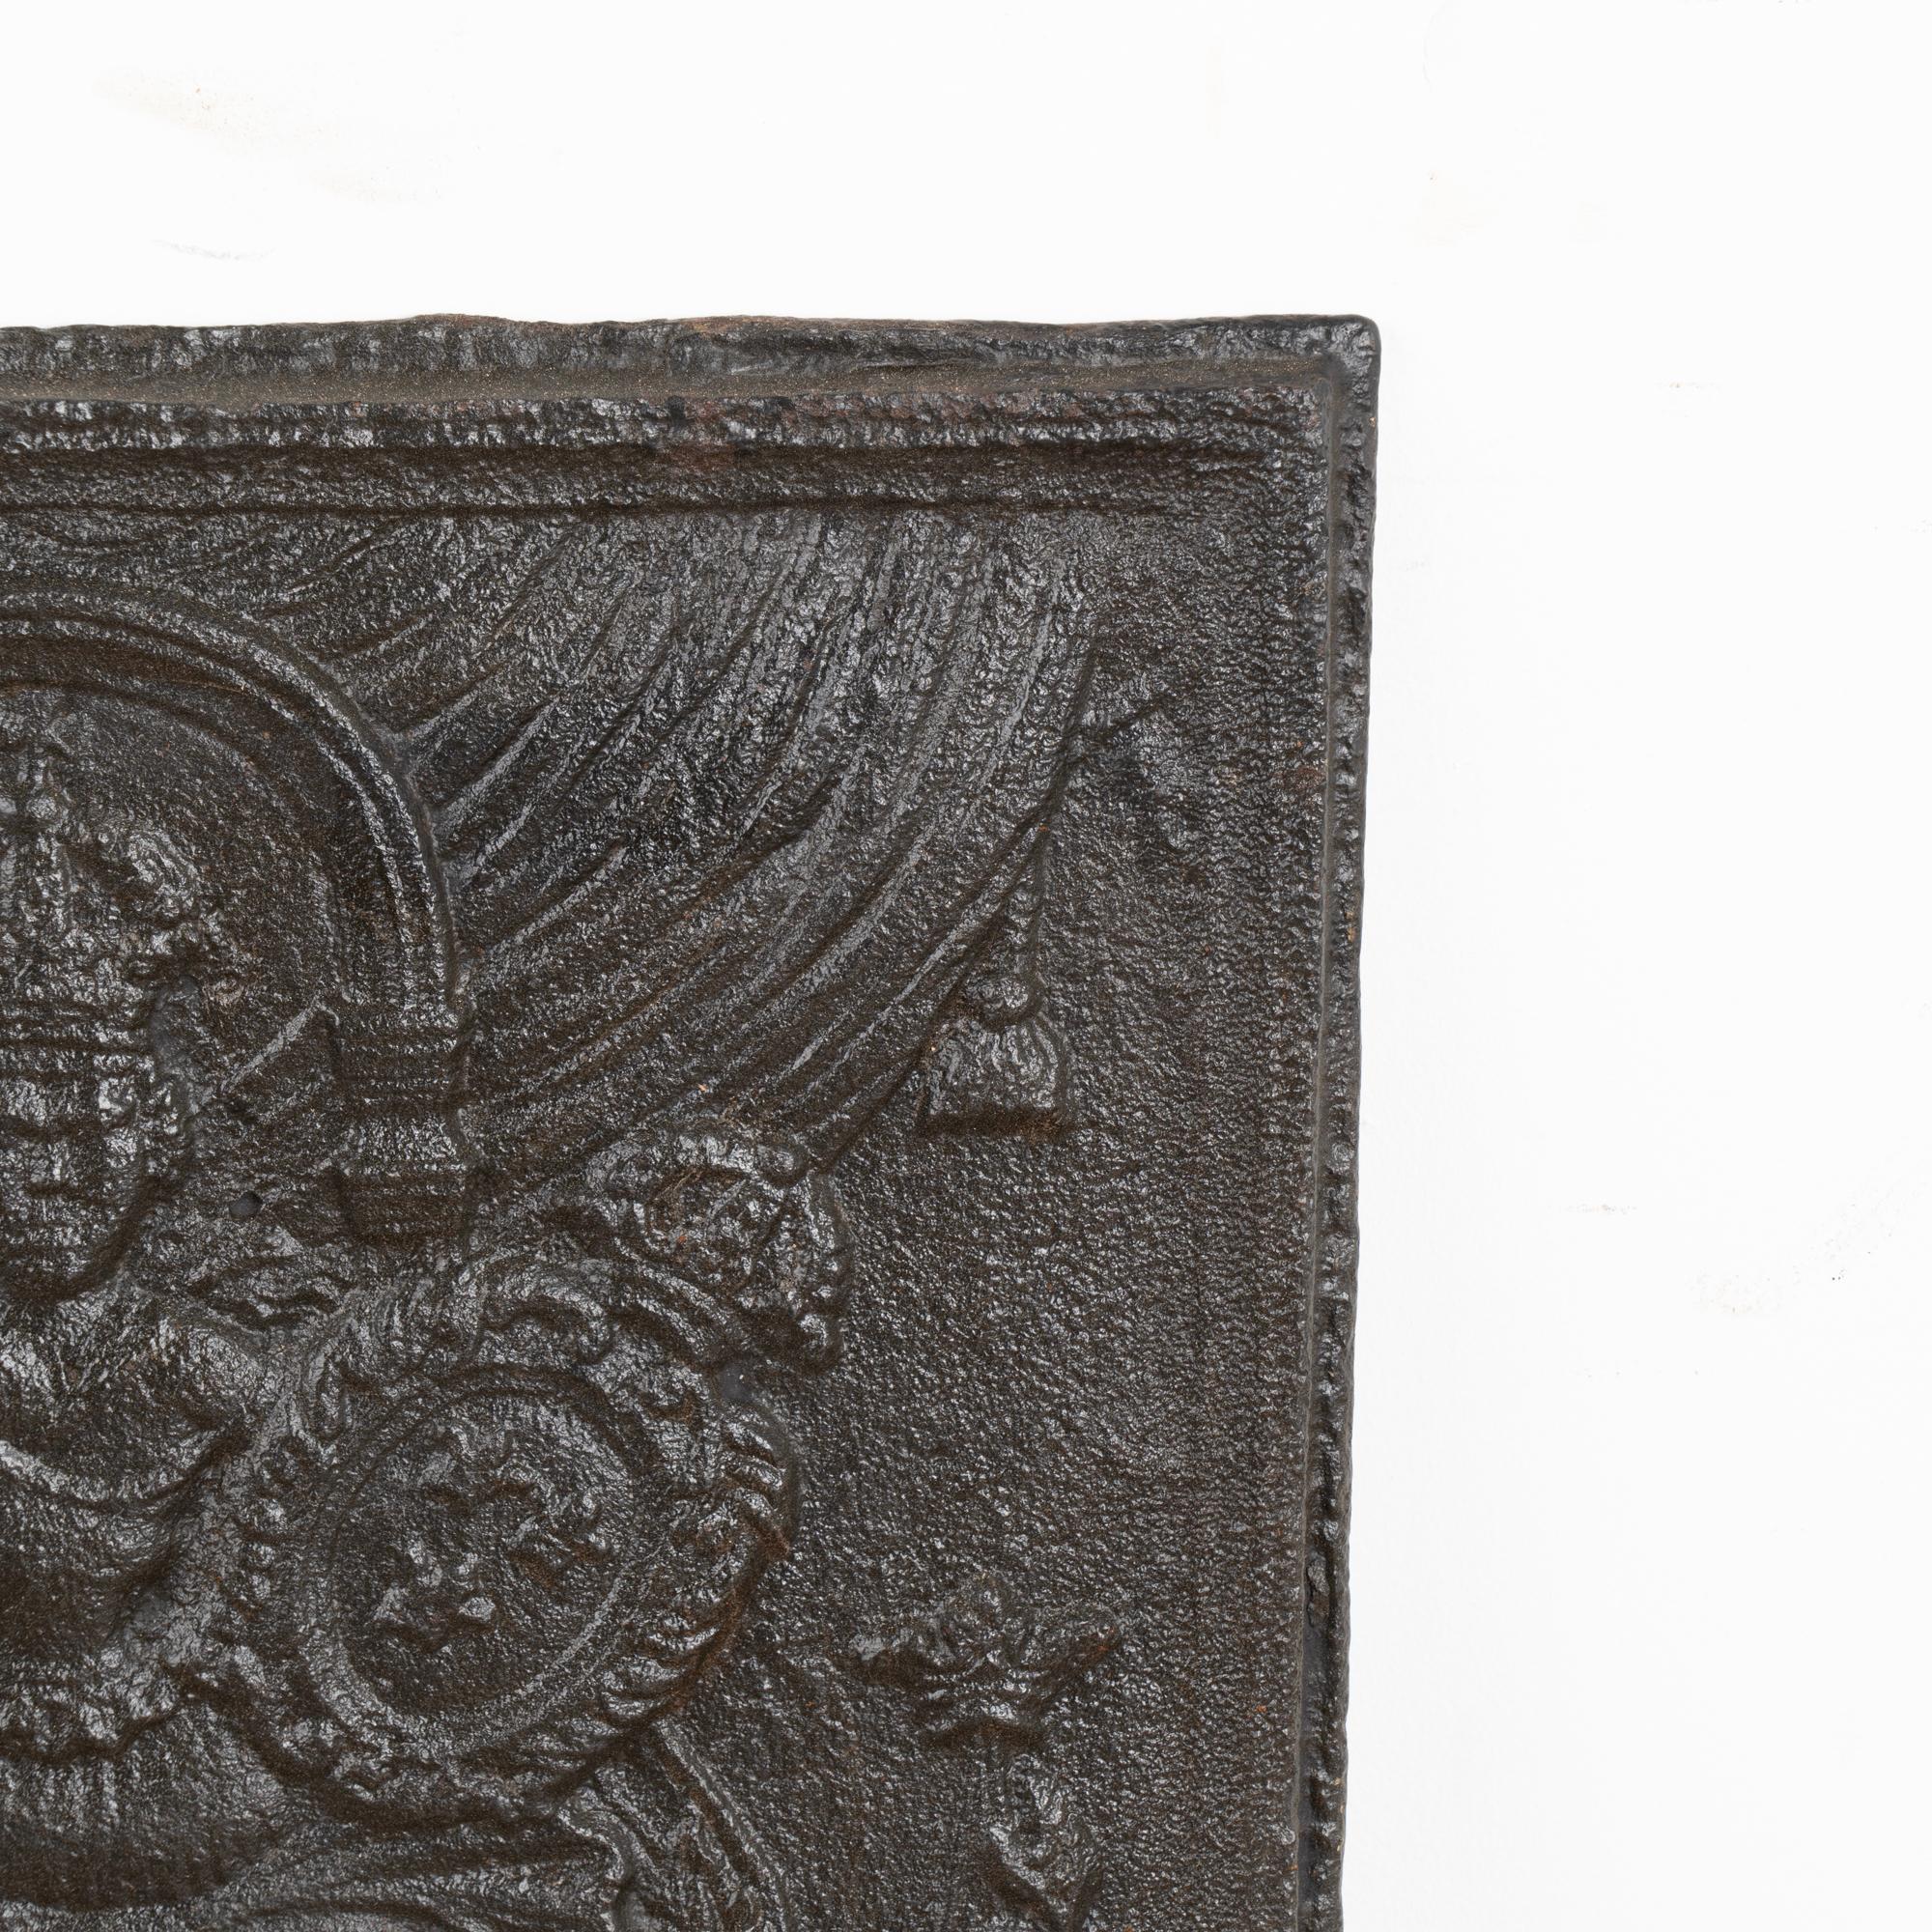 Decorative Cast Iron Fire Back With Queen, Sweden circa 1760-80 For Sale 3